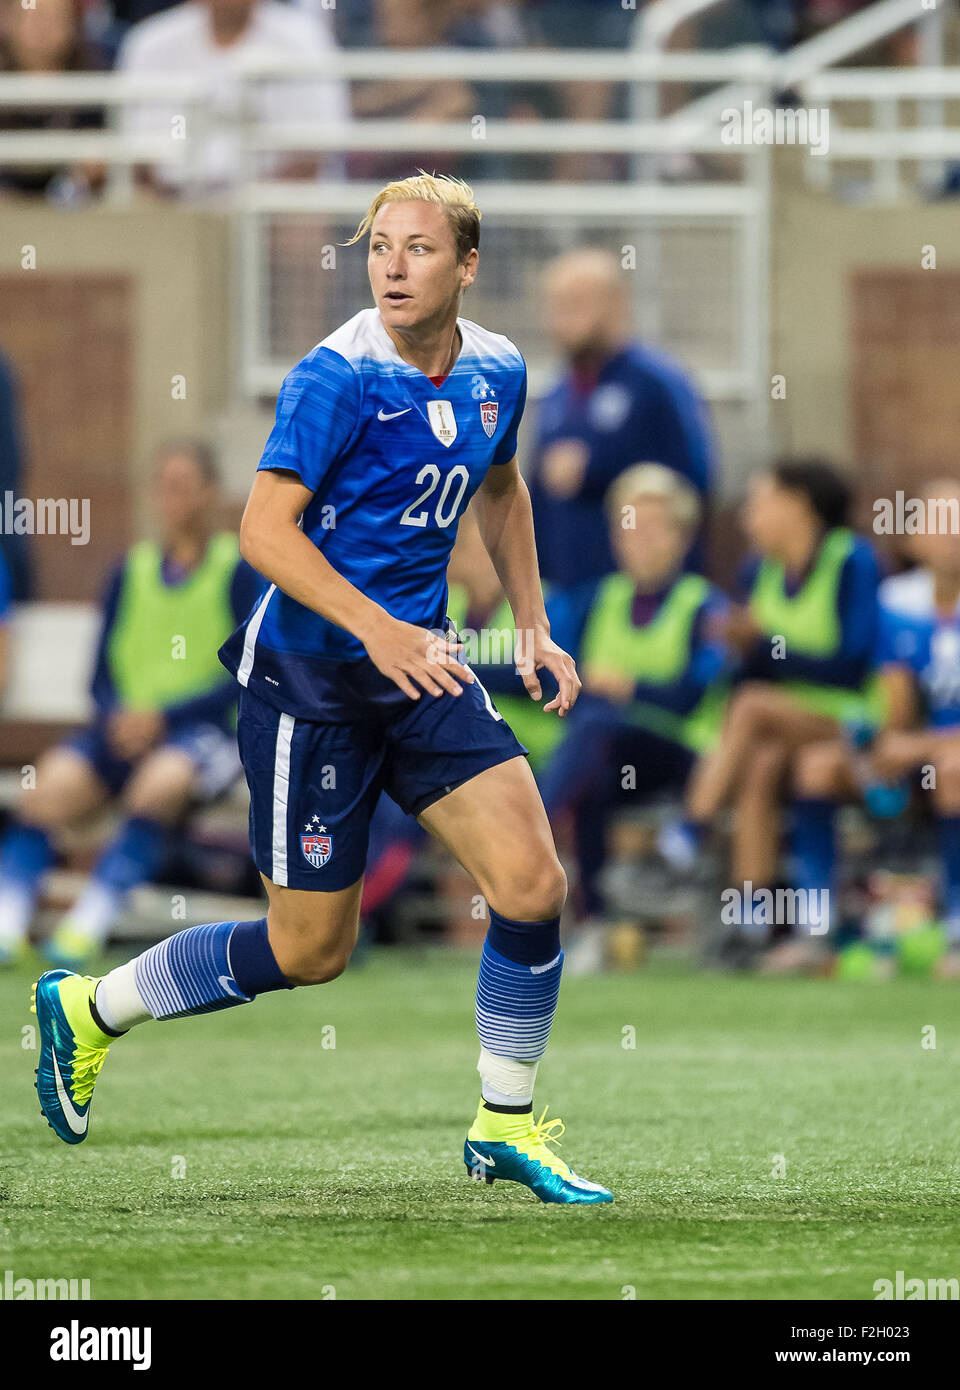 Detroit, Michigan, USA. 17th Sep, 2015. USA's Abby Wambach (20) during game action at the International Friendly Soccer Match between the United States Women's National Team and the Haitian Women's National Team at Ford Field in Detroit, Michigan. USA won the match 5-0. Credit:  Scott Hasse/ZUMA Wire/Alamy Live News Stock Photo